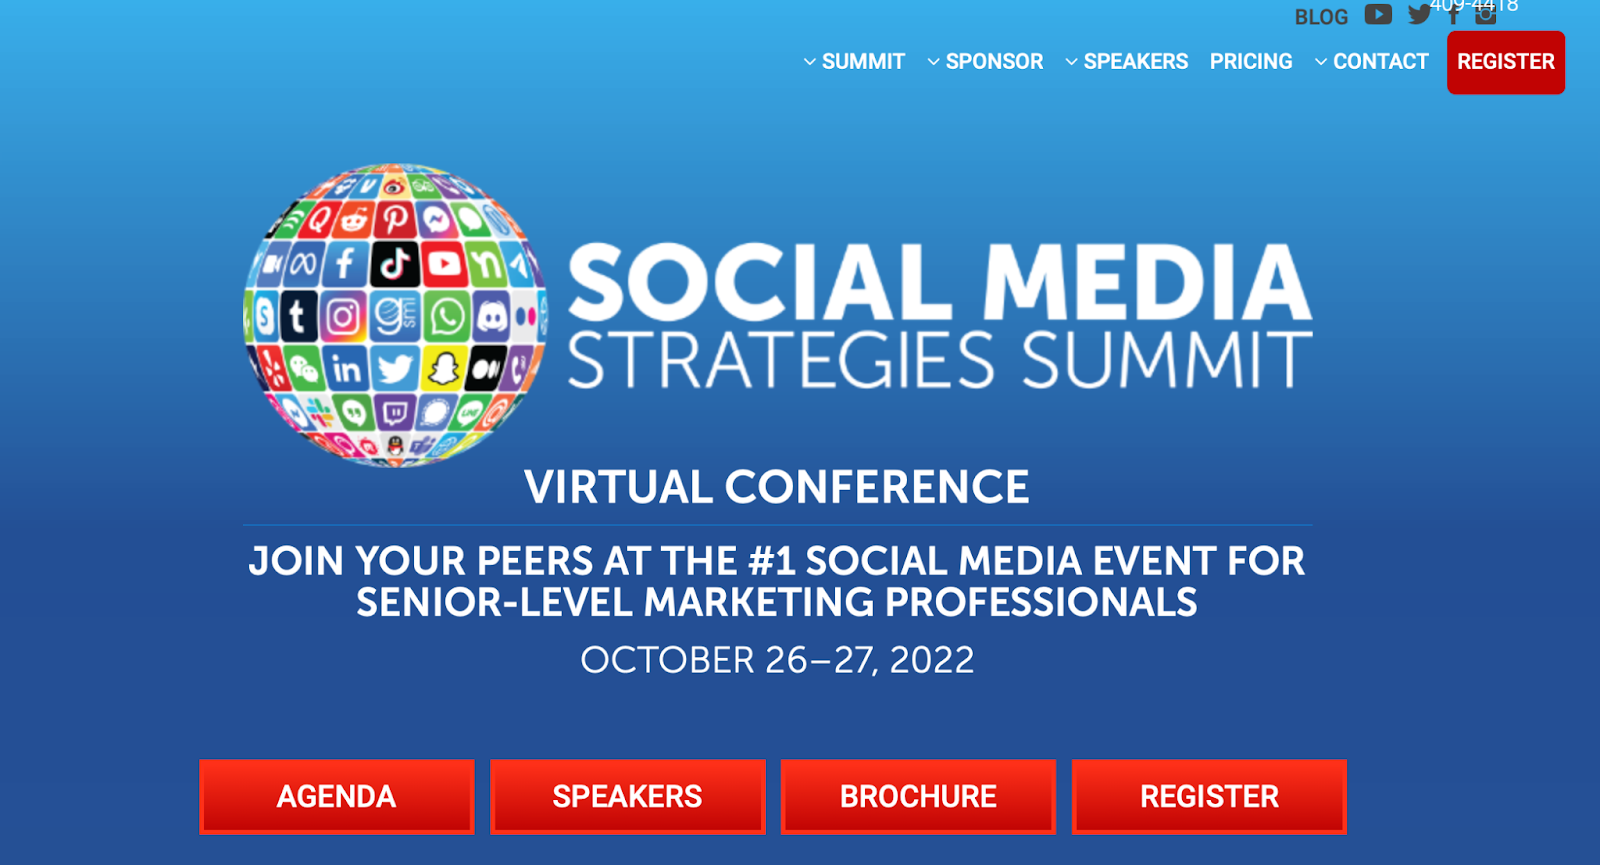 Popular Social Media Events and Courses to Know